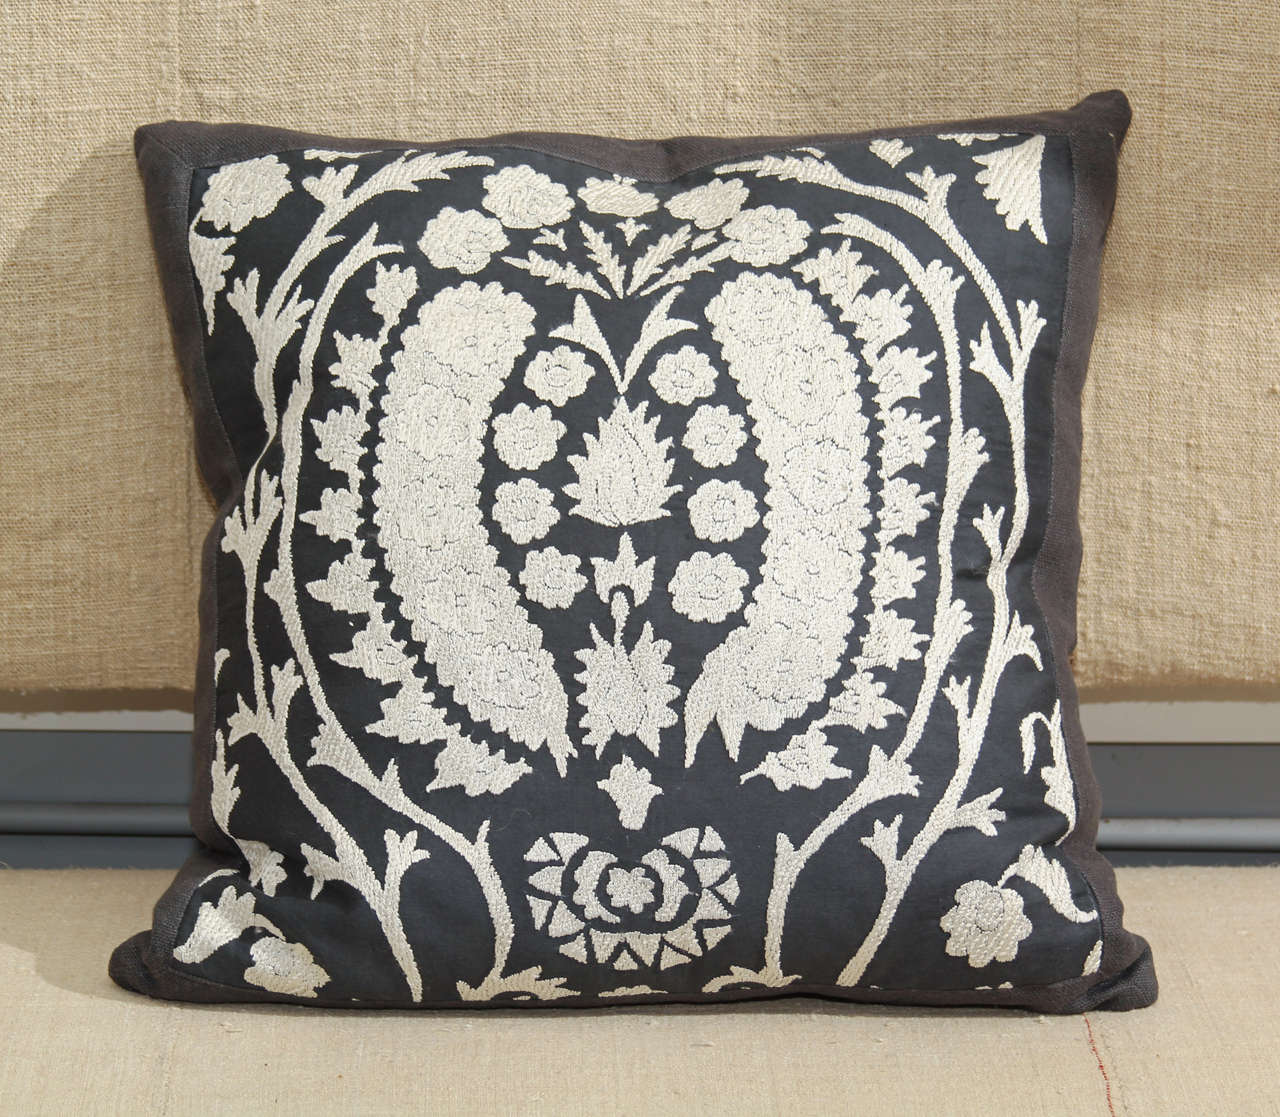 beautiful suzani work backed in matching charcoal linen, down insert.   1pillow
available, priced individually